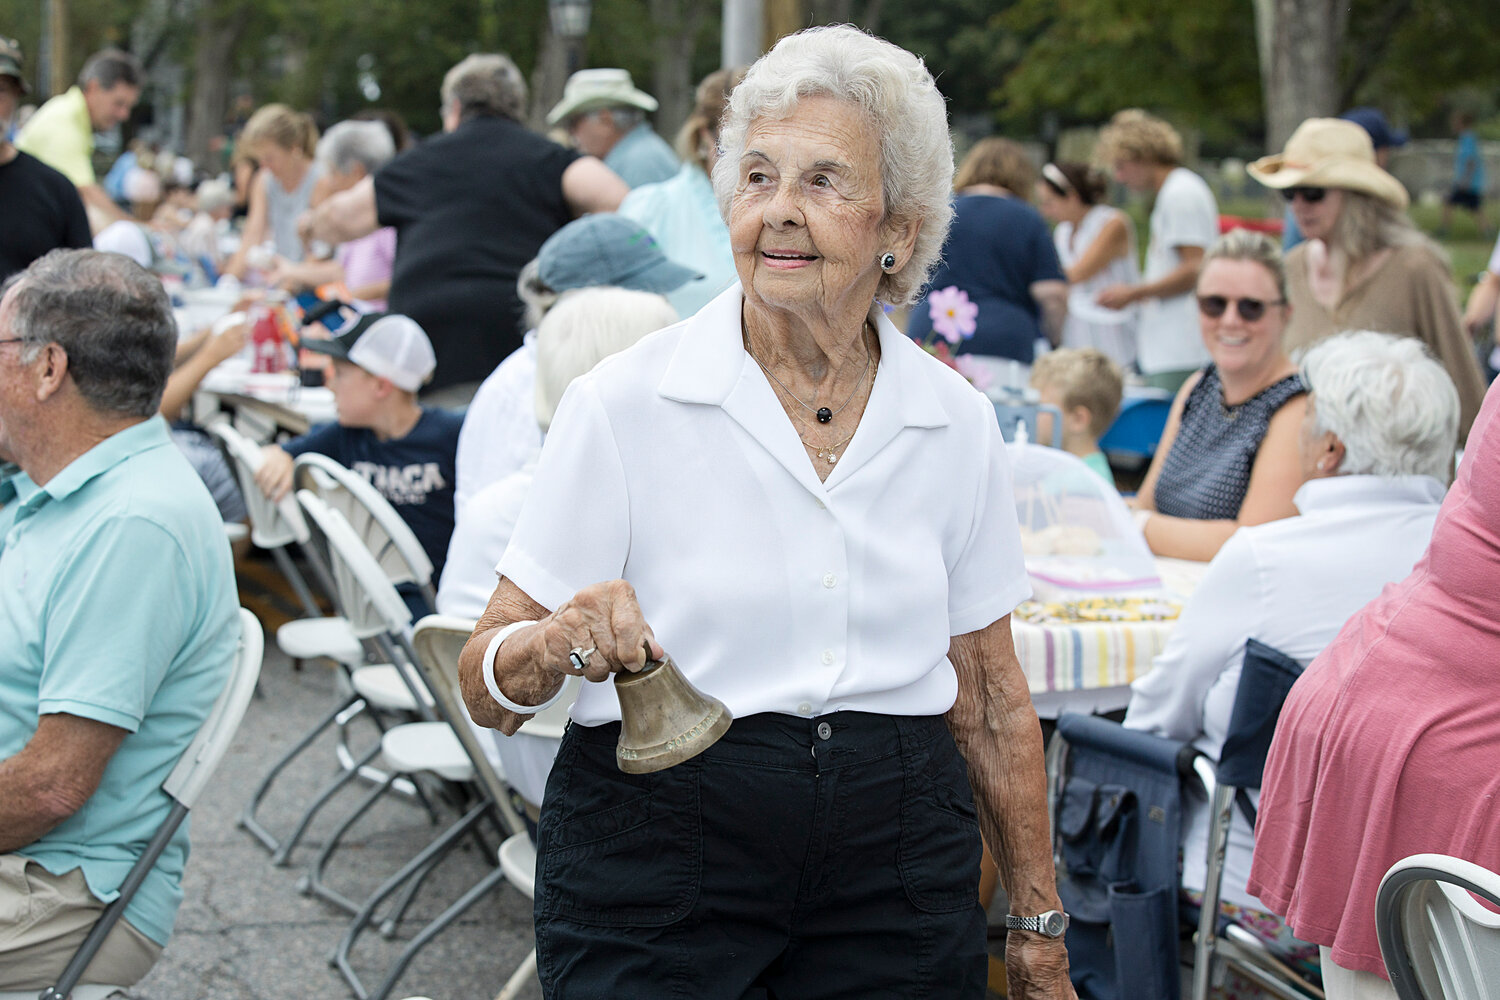 Barbara Passmore rings the dinner bell at this year's Little Compton Community Dinner, held last month.